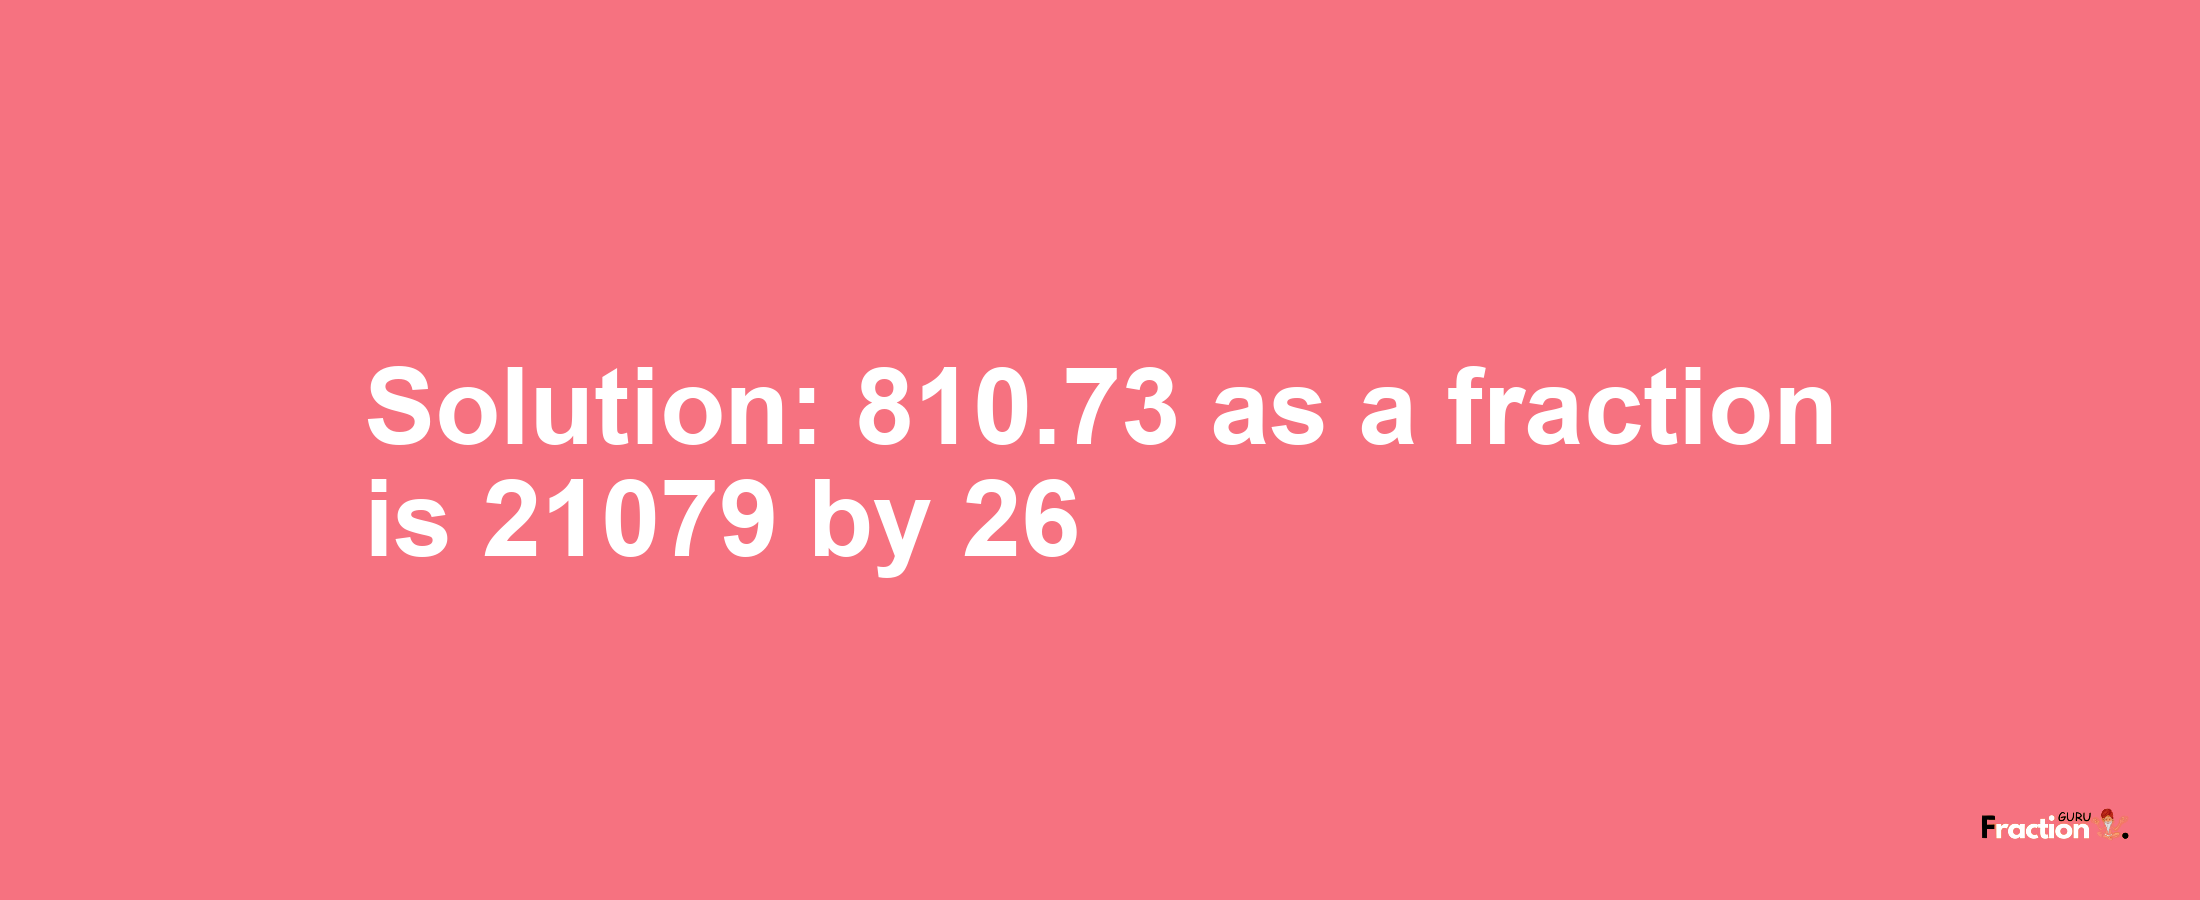 Solution:810.73 as a fraction is 21079/26